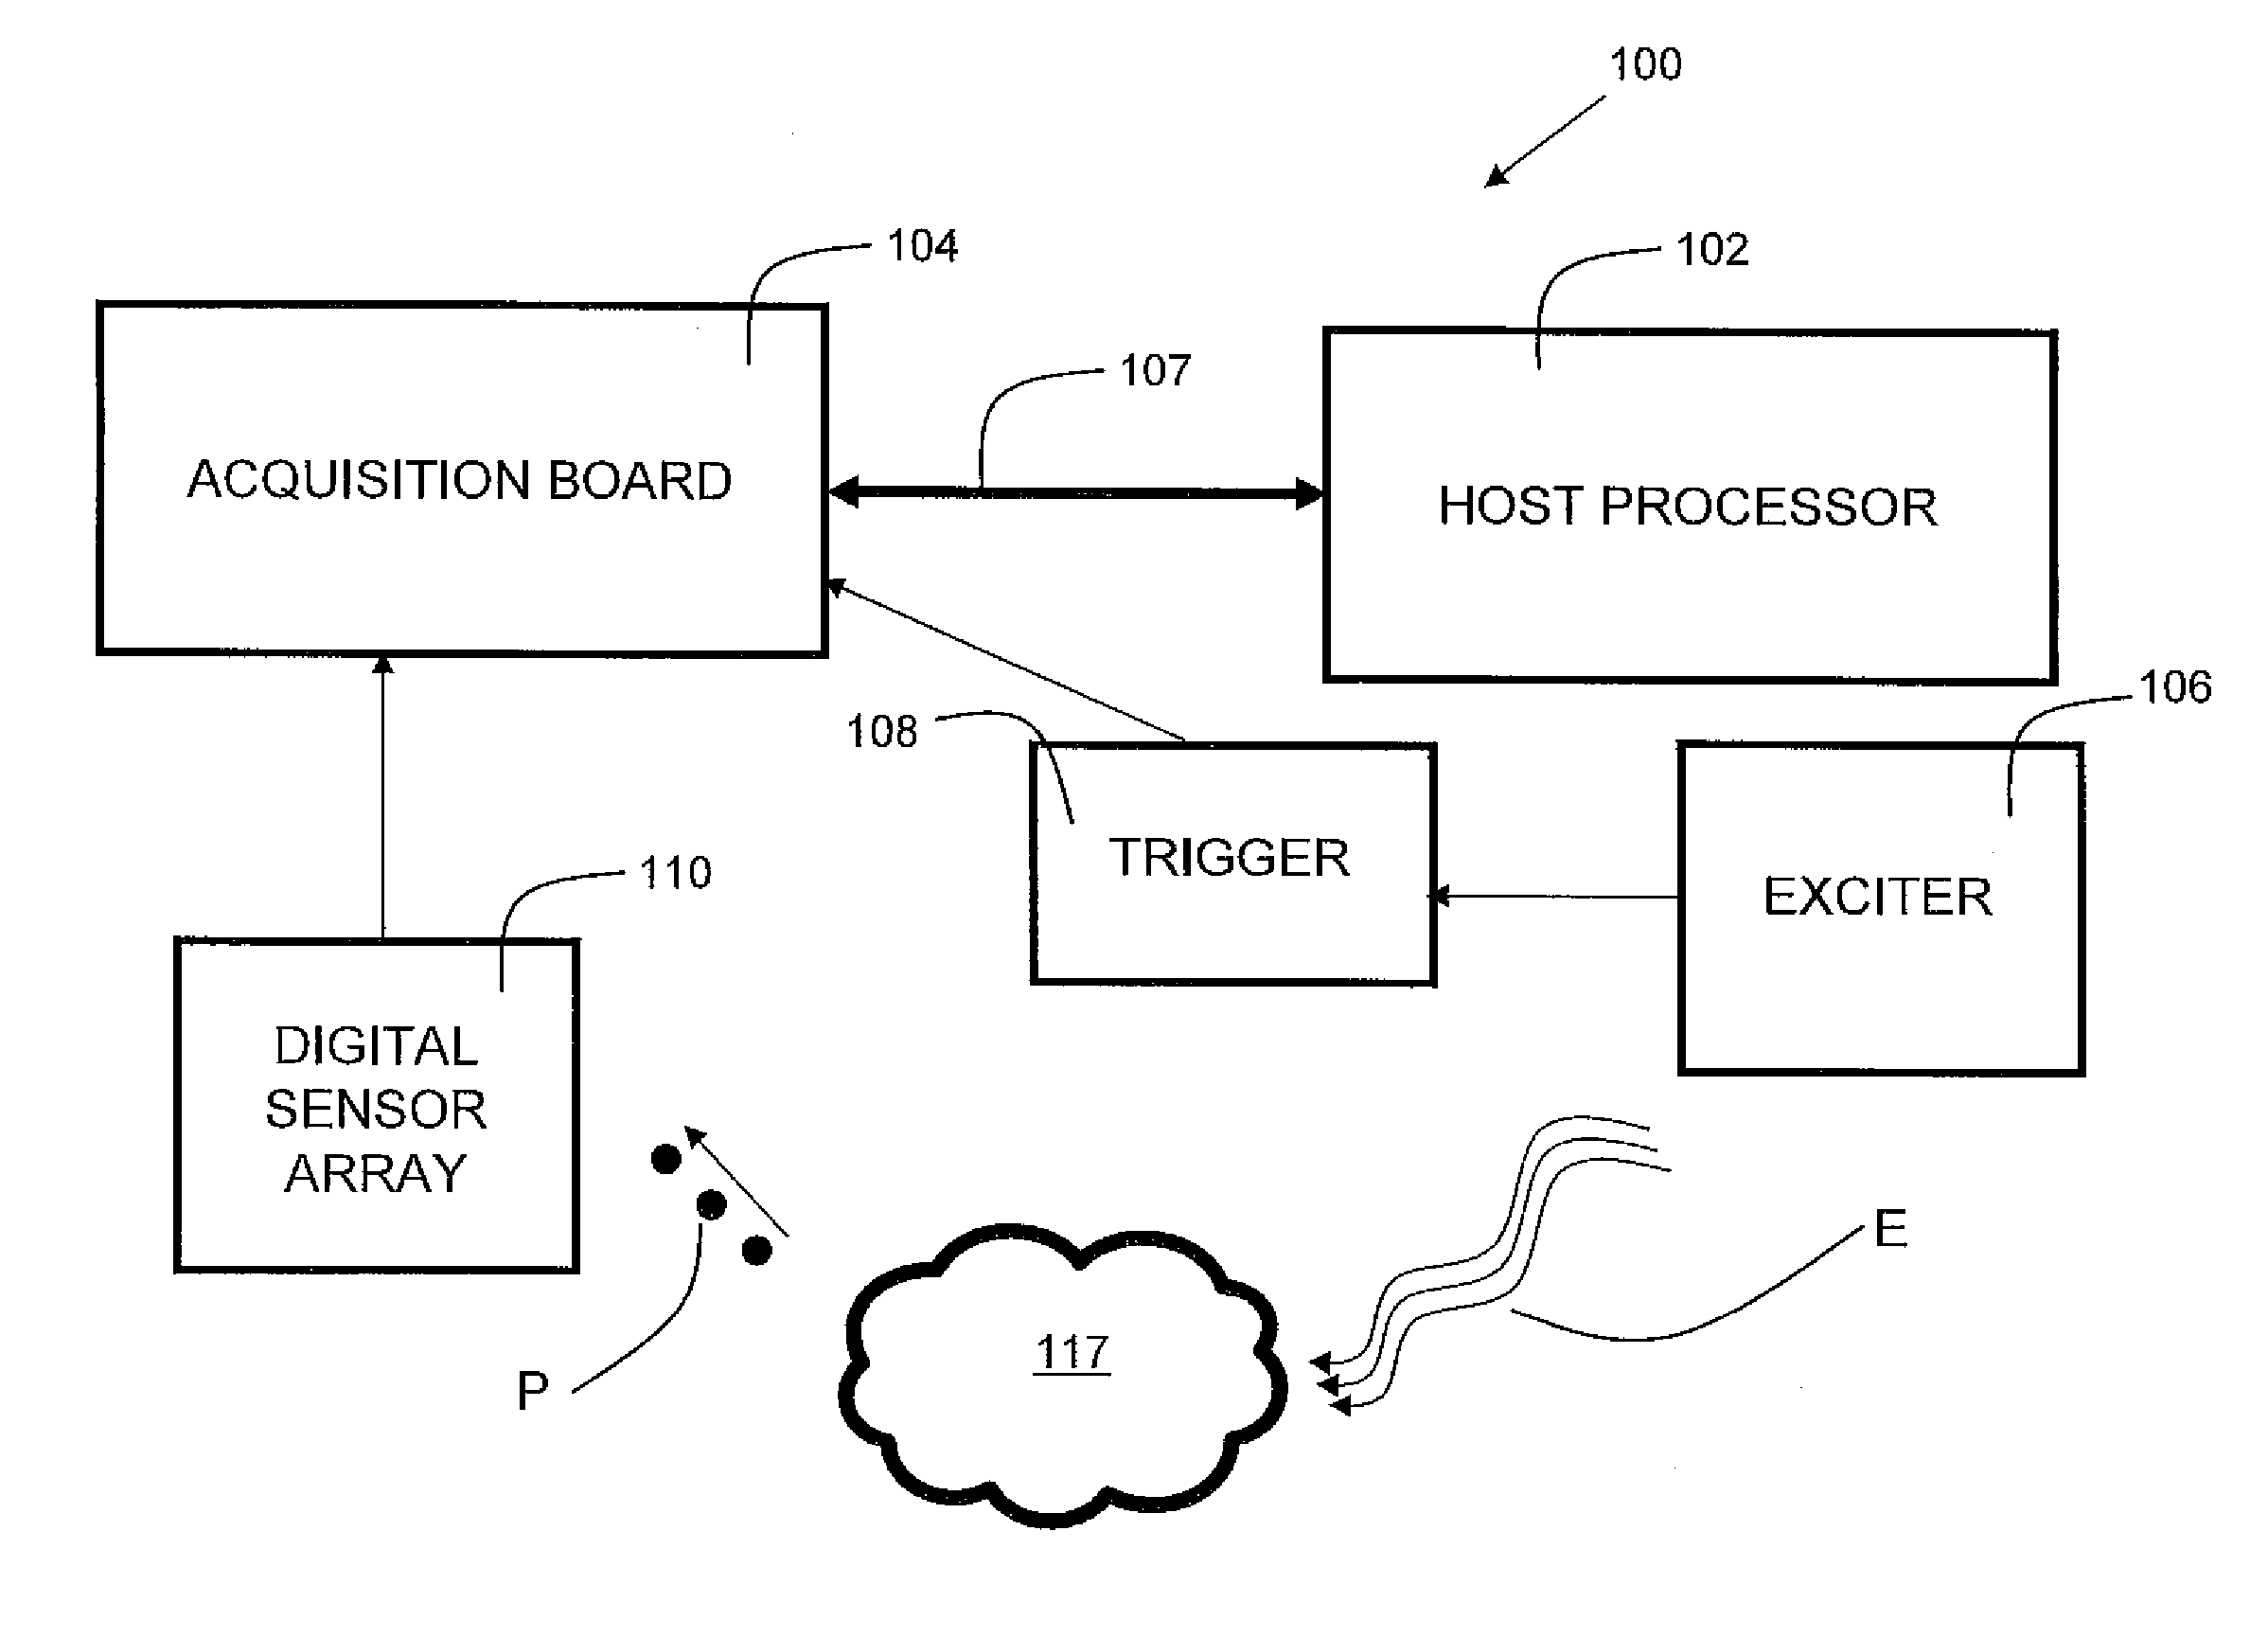 Low cost multi-channel data acquisition system